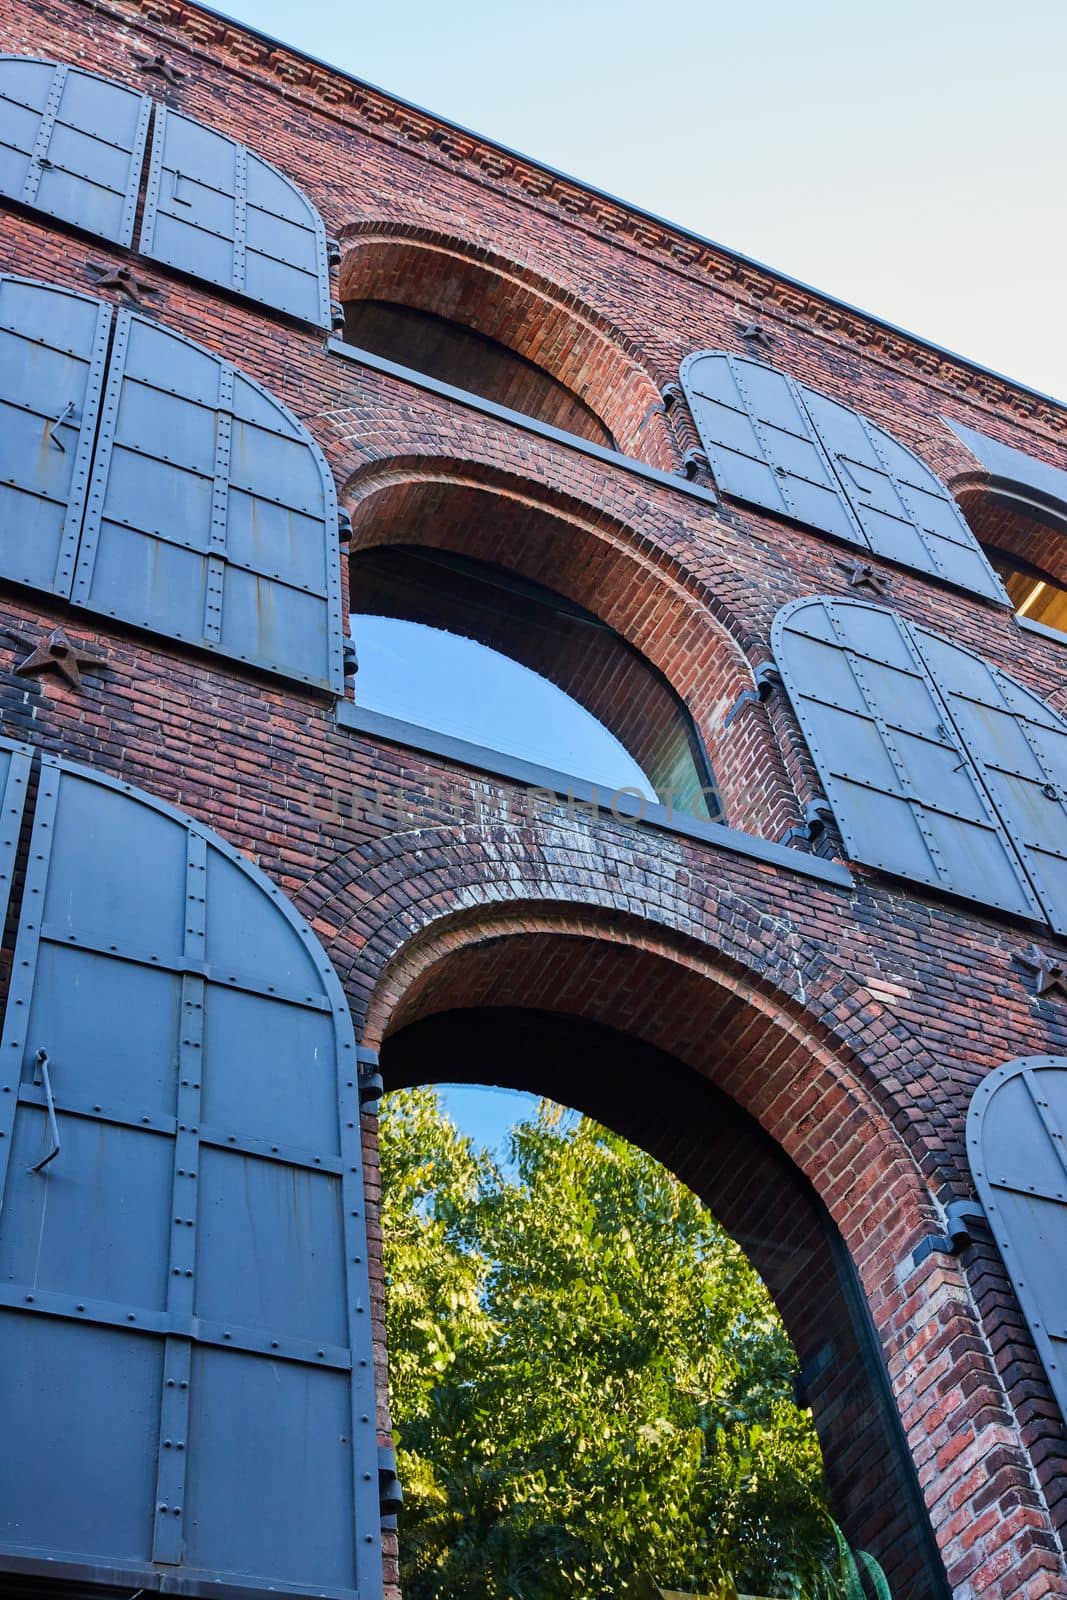 Image of Looking up brick building with arches to woods and dark steel covers